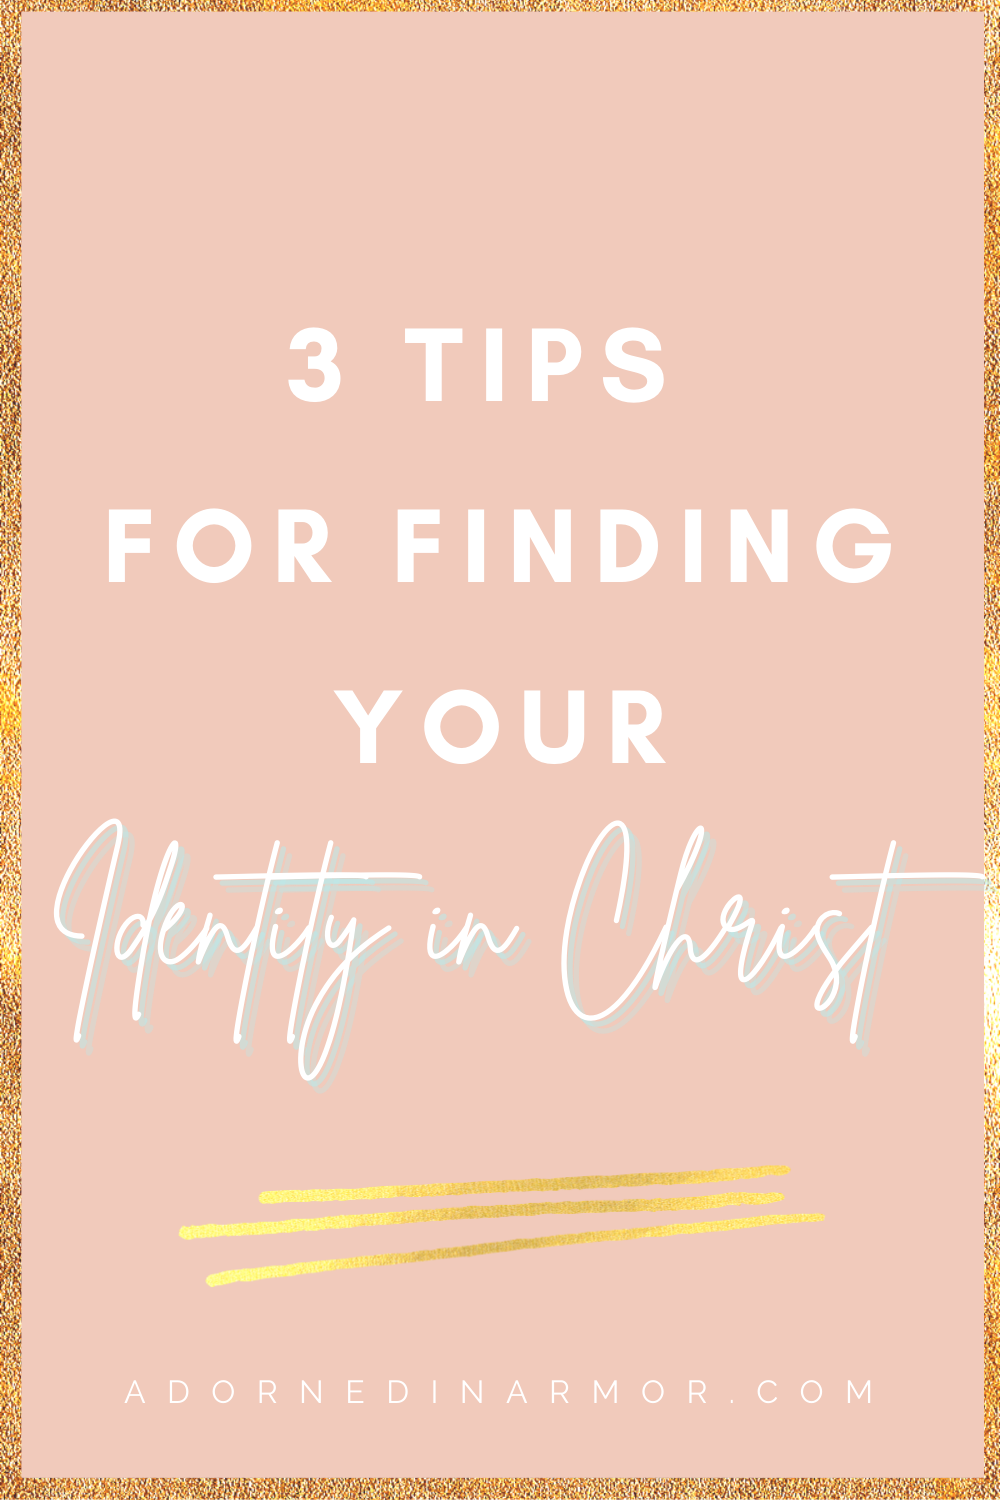 How To Find Your Identity in Christ (The 3 In-Depth Tips You NEED!)